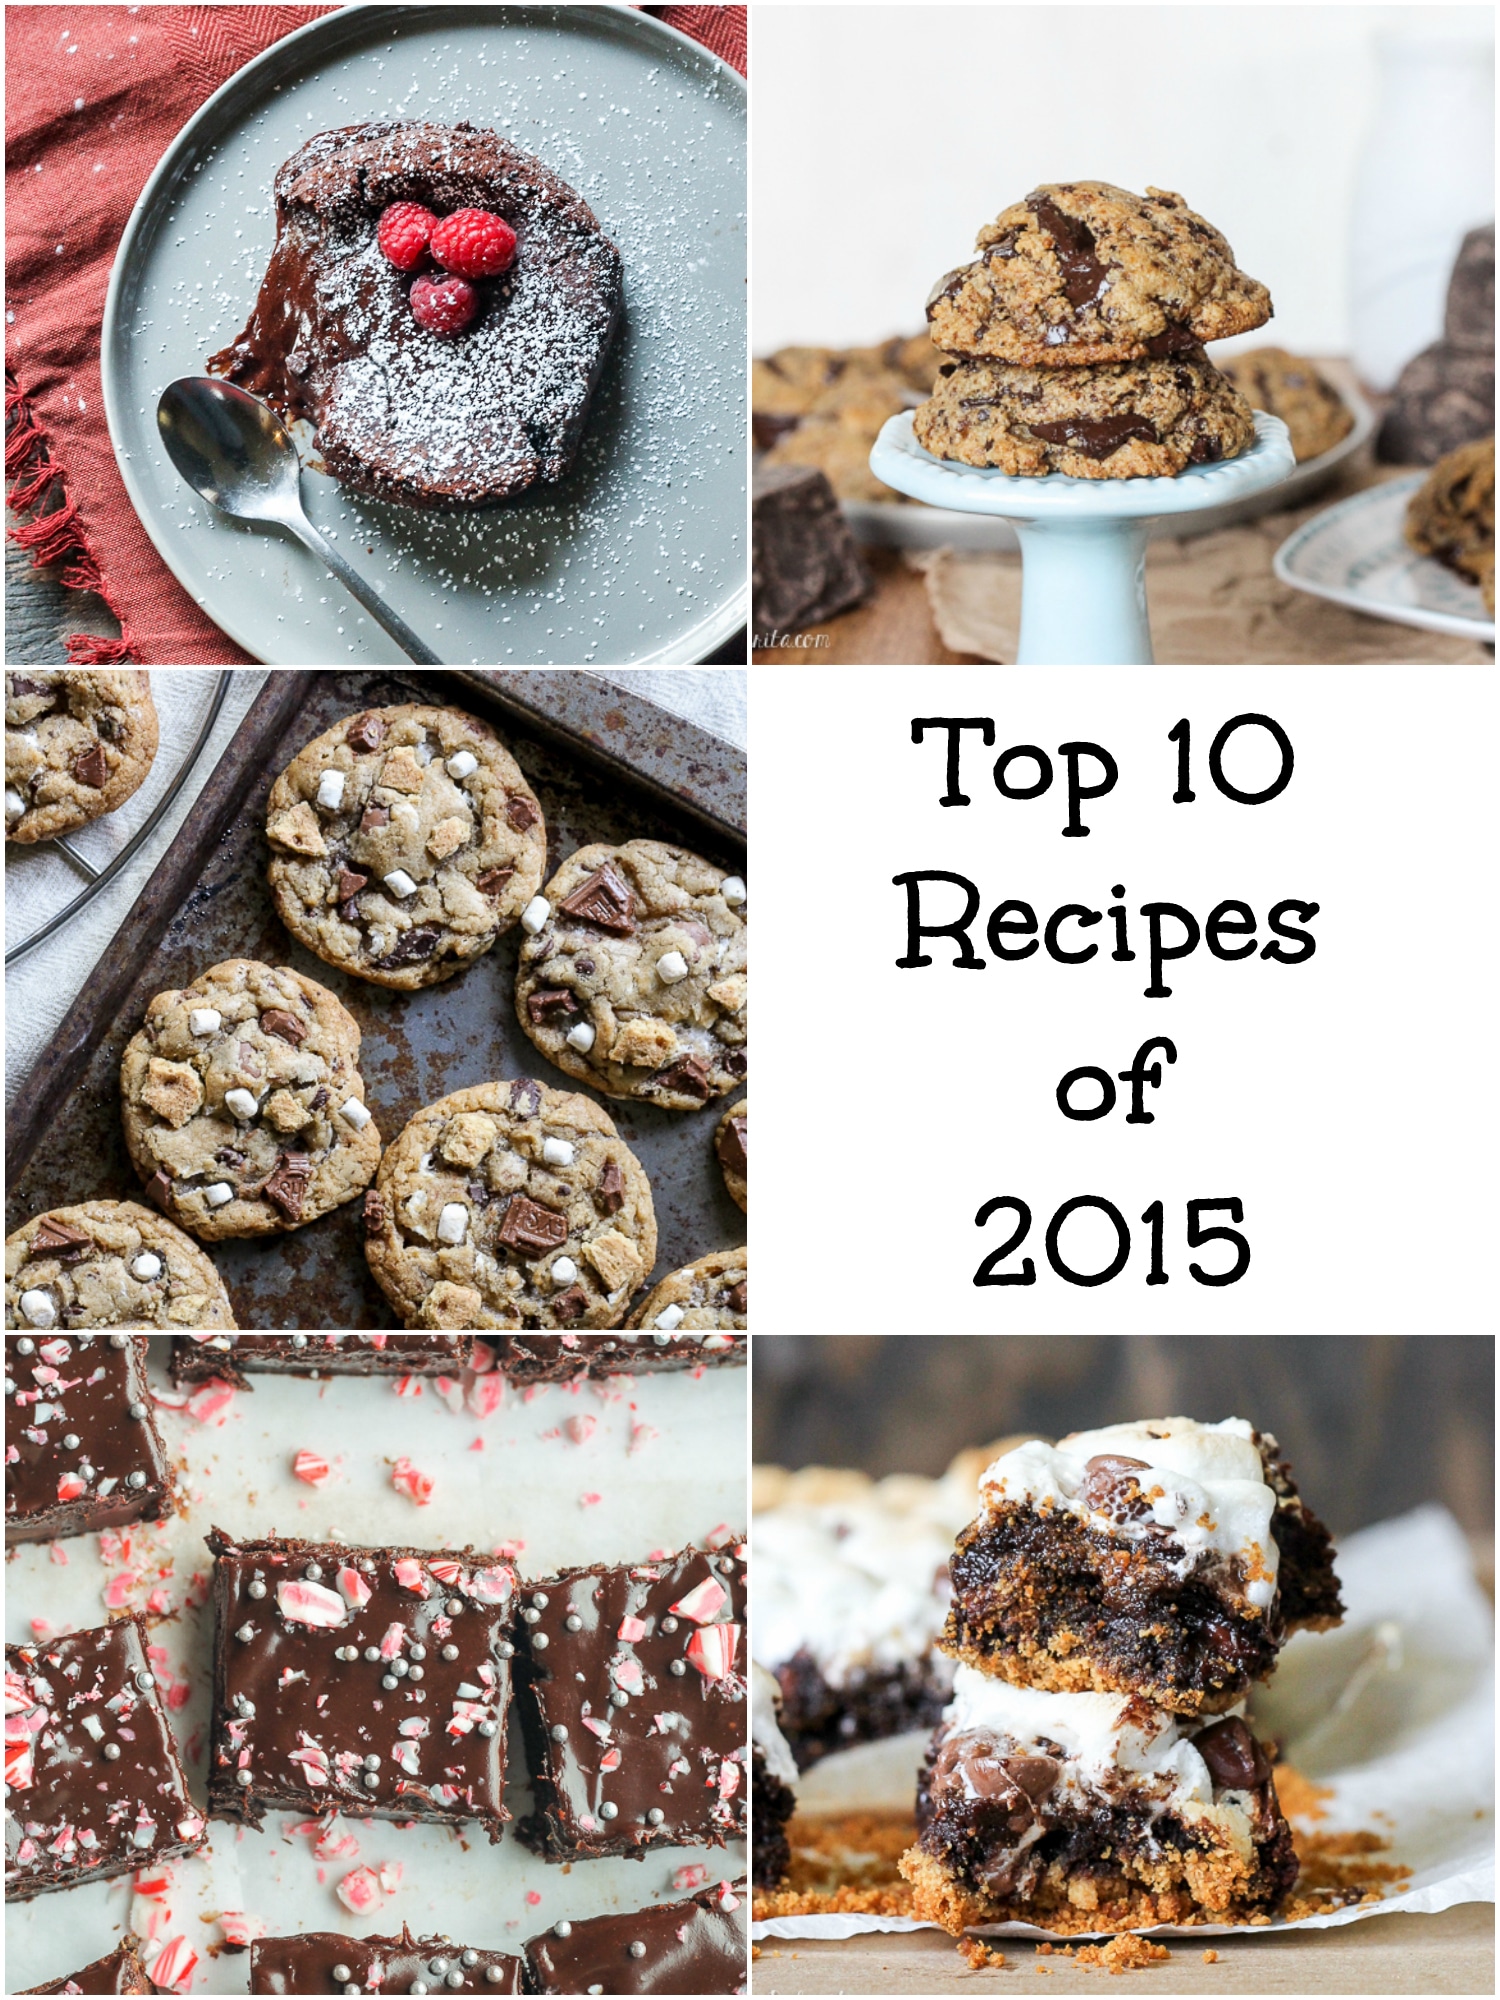 These recipes make up Bakerita's Top 10 Recipes of 2015! These are the reader favorites that have been a hit in kitchens all over - these favorites won't disappoint.